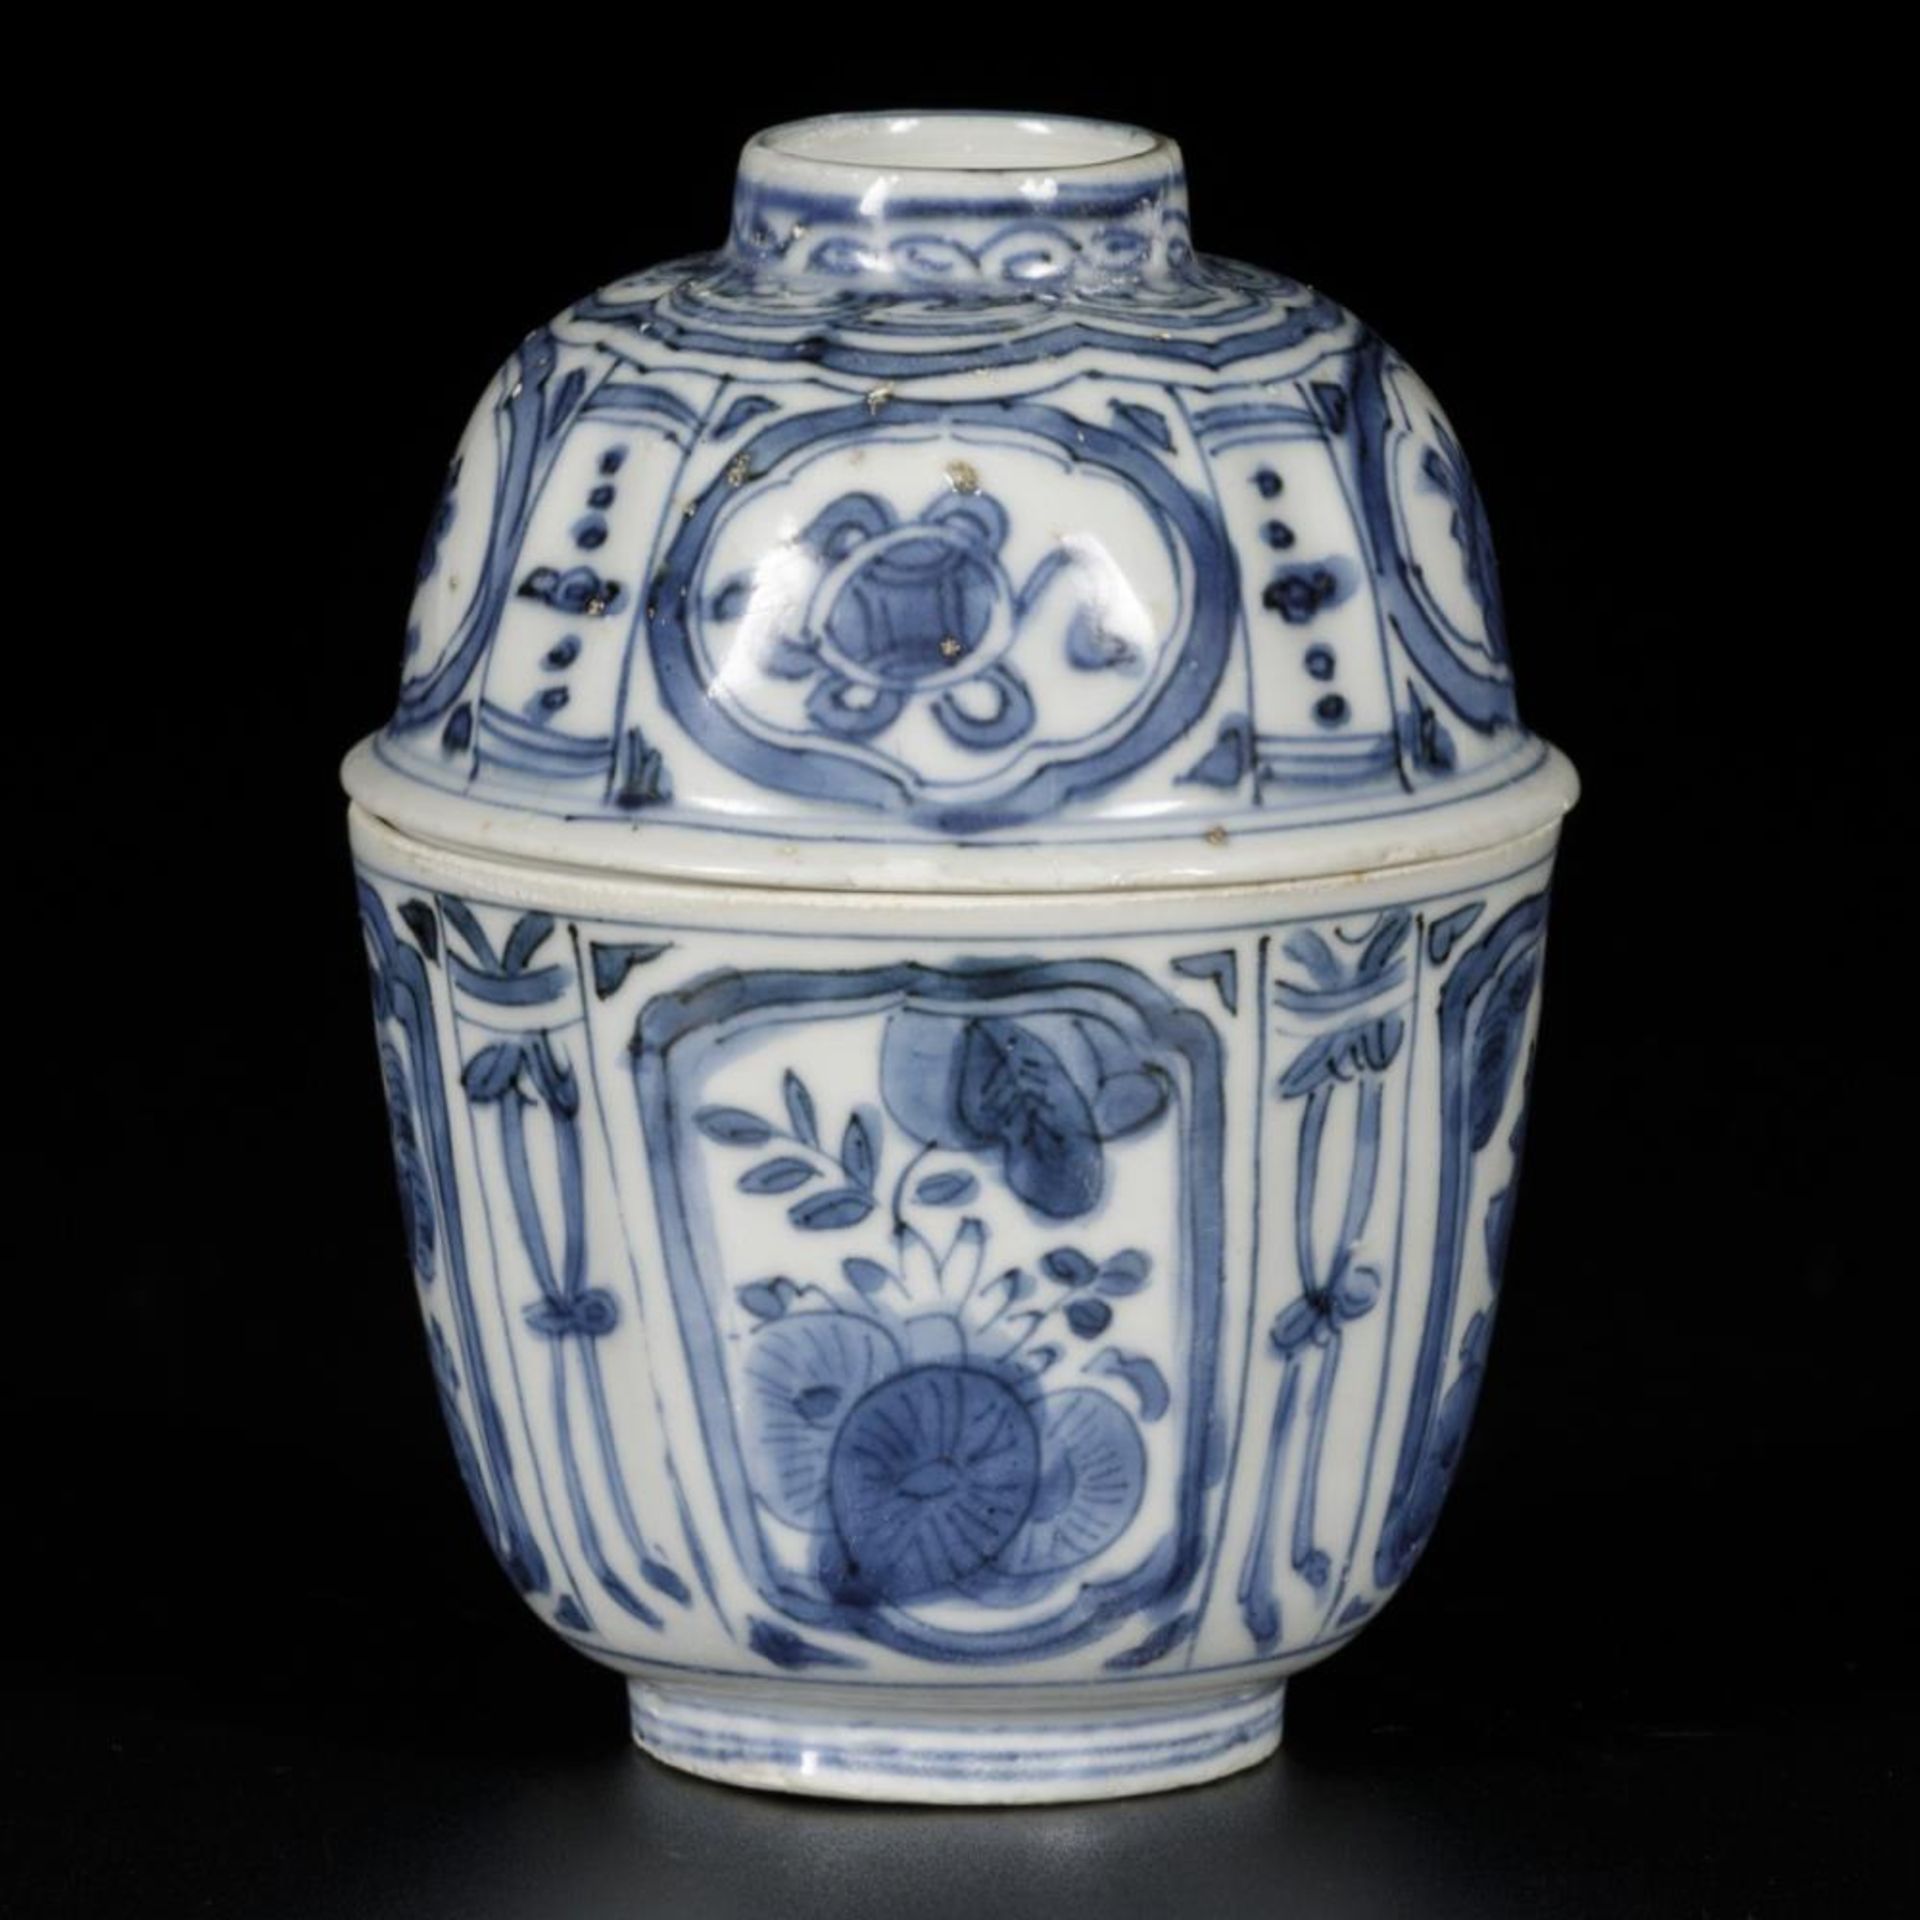 A porcelain lidded bowl with floral decor, China, Wanli.